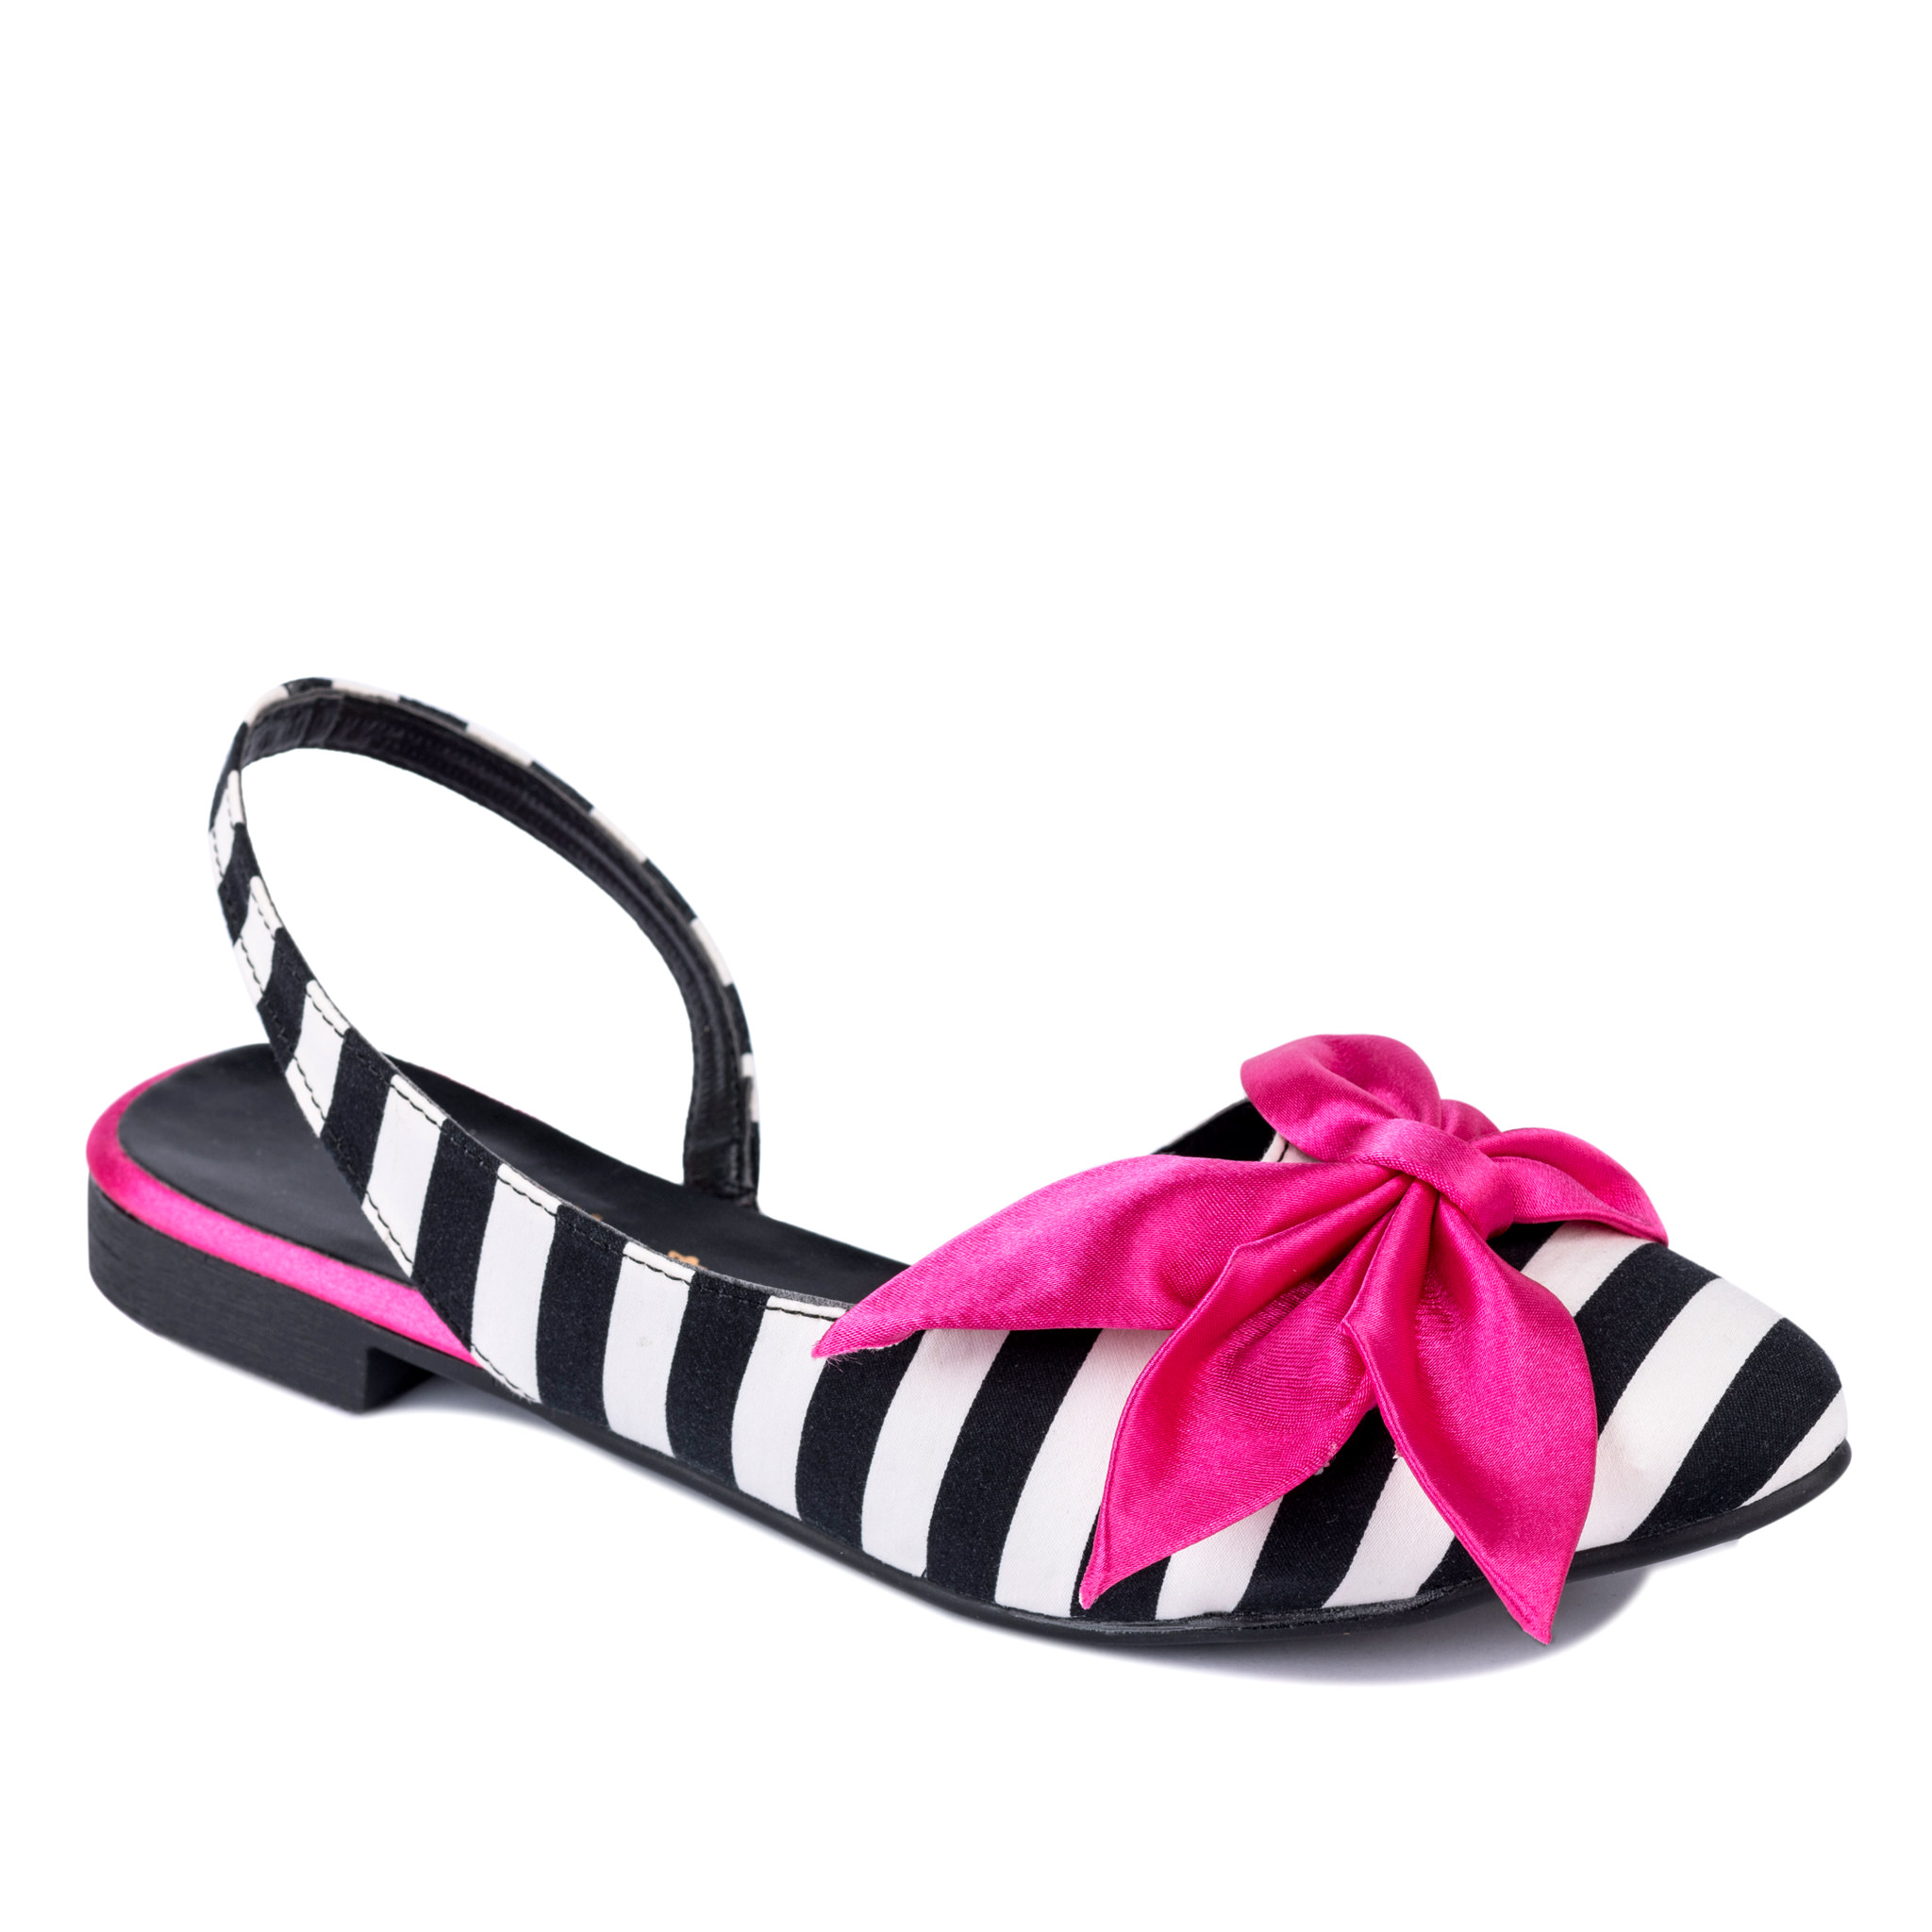 STRIPED FLATS WITH PINK BOW - BLACK/WHITE